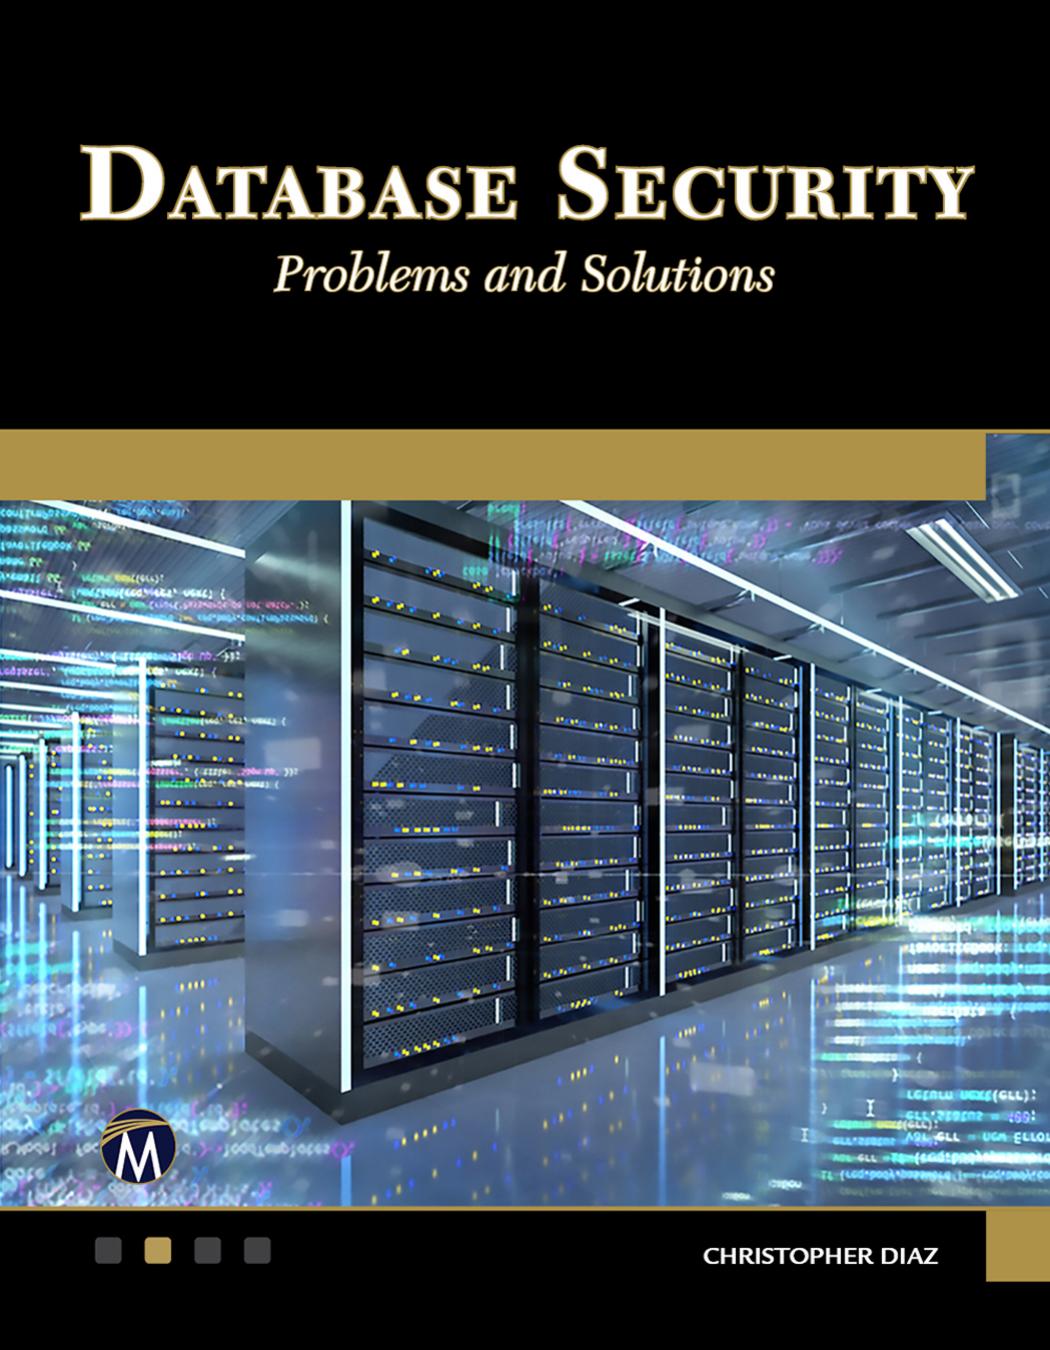 Database security. Problems and Solutions by Christopher Diaz